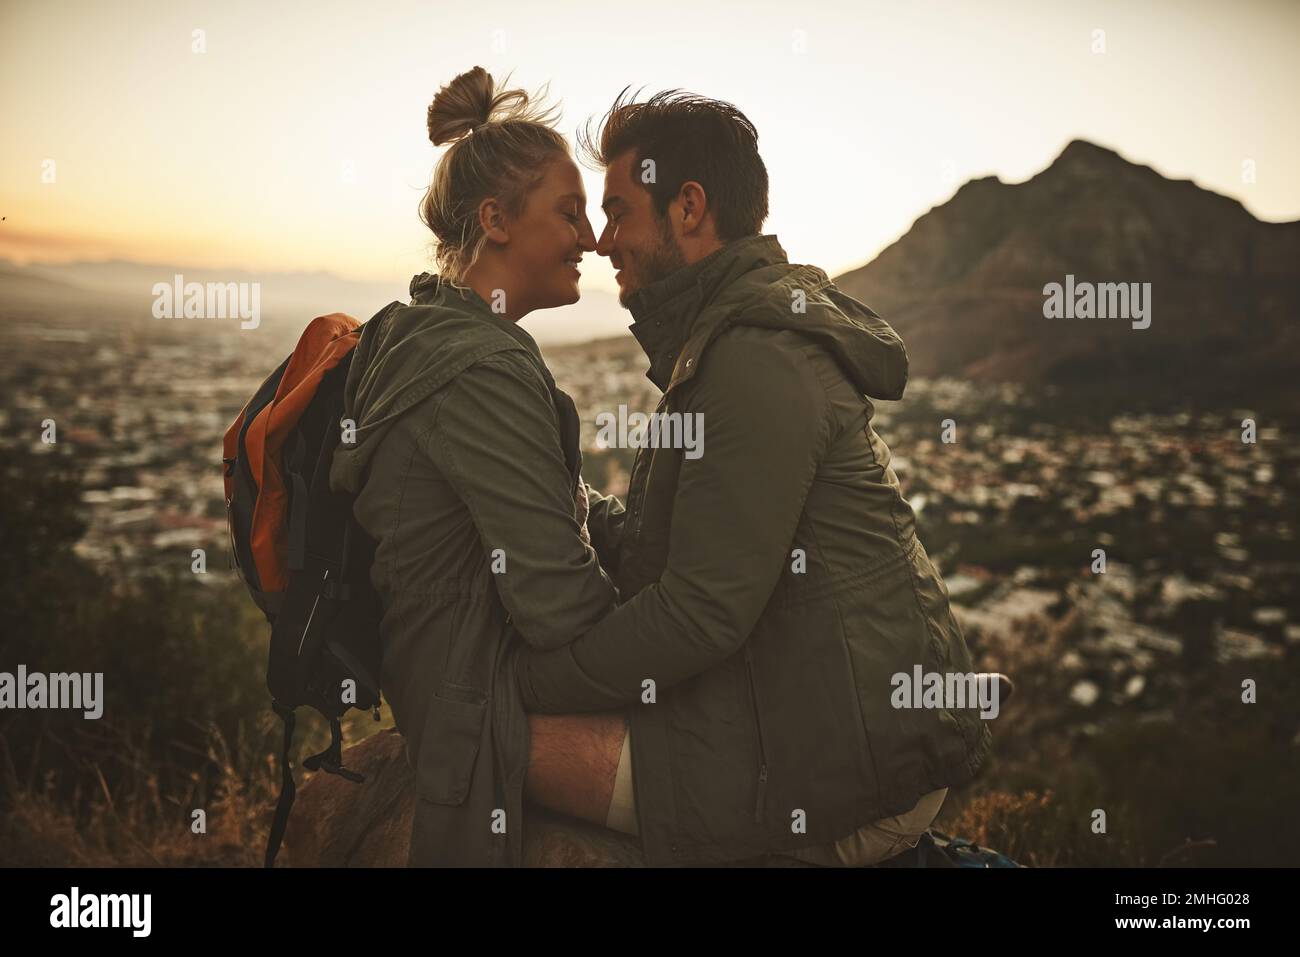 Find your adventurous match. an affectionate couple on a mountain top. Stock Photo